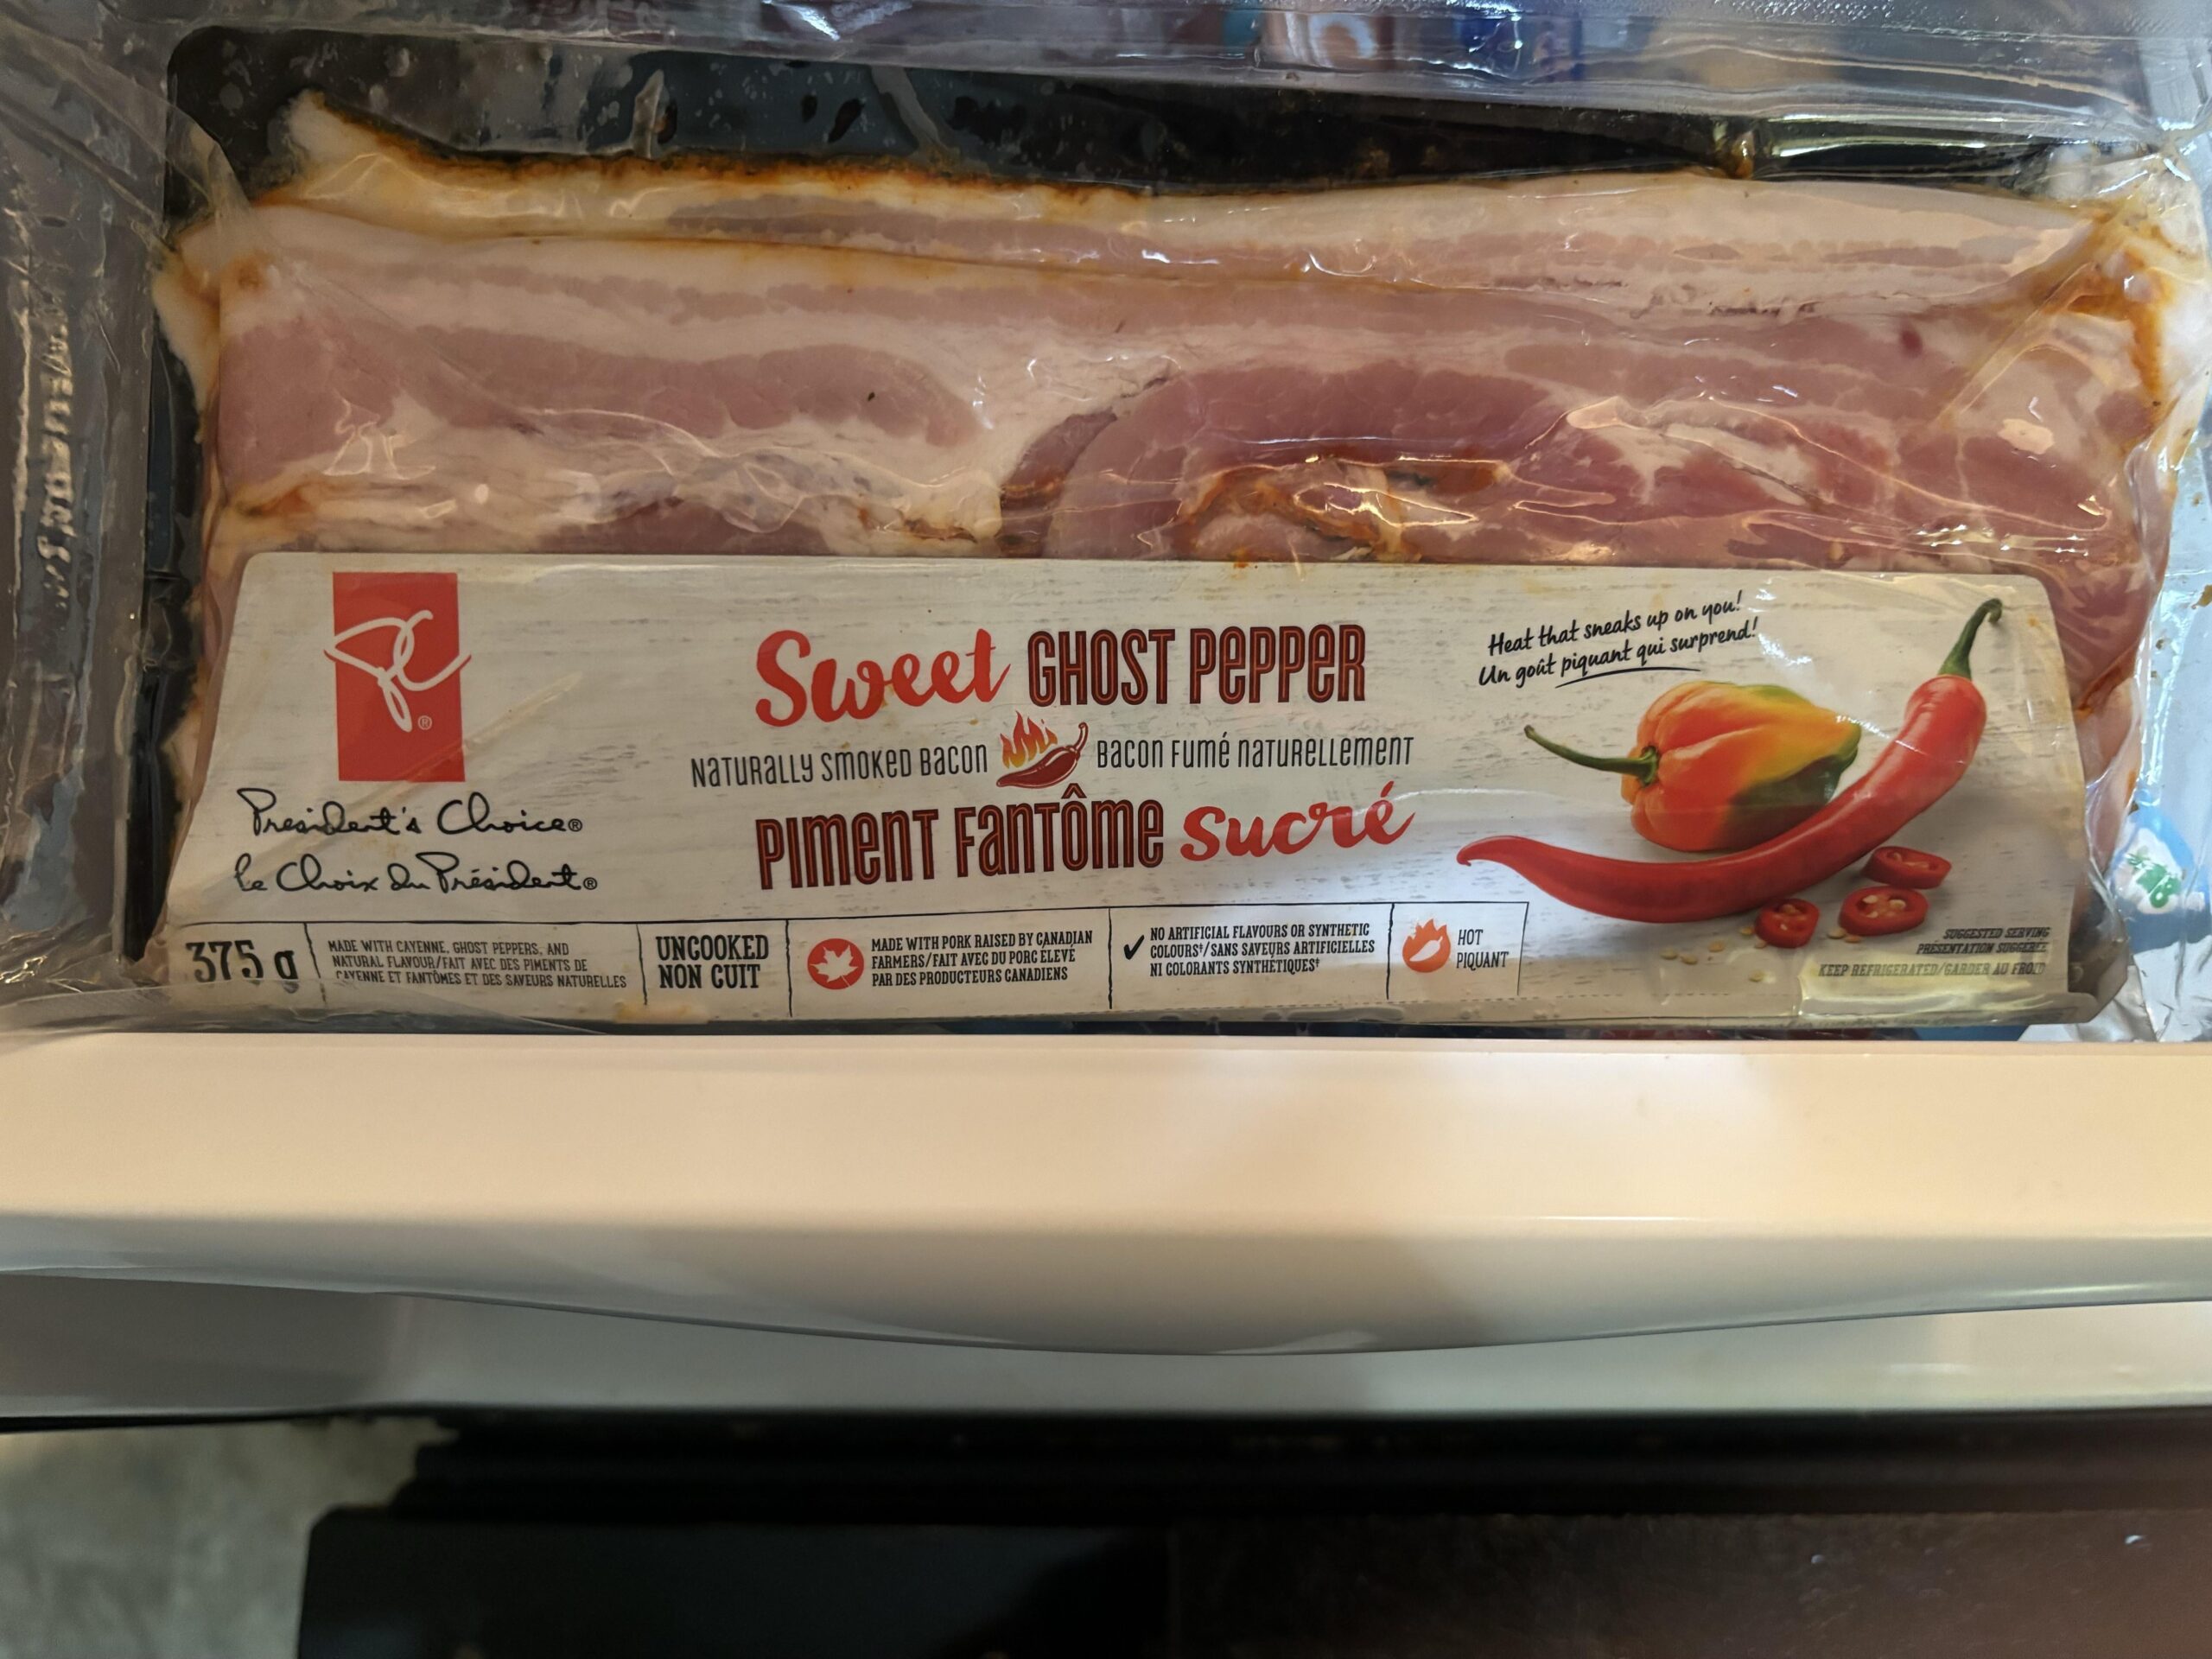 Got some sweet ghost pepper bacon with groceries yesterday to try ...